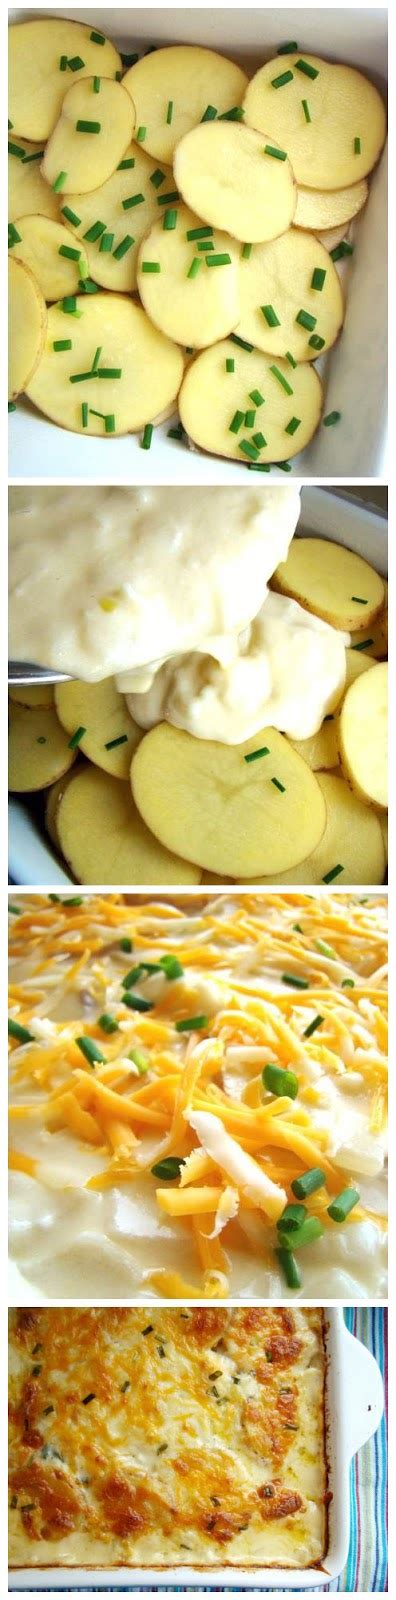 Give the cream mixture a quick whisk and pour about a third of it over the potatoes. Cheesy Scalloped Potatoes Recipe | Quick & Easy Recipes